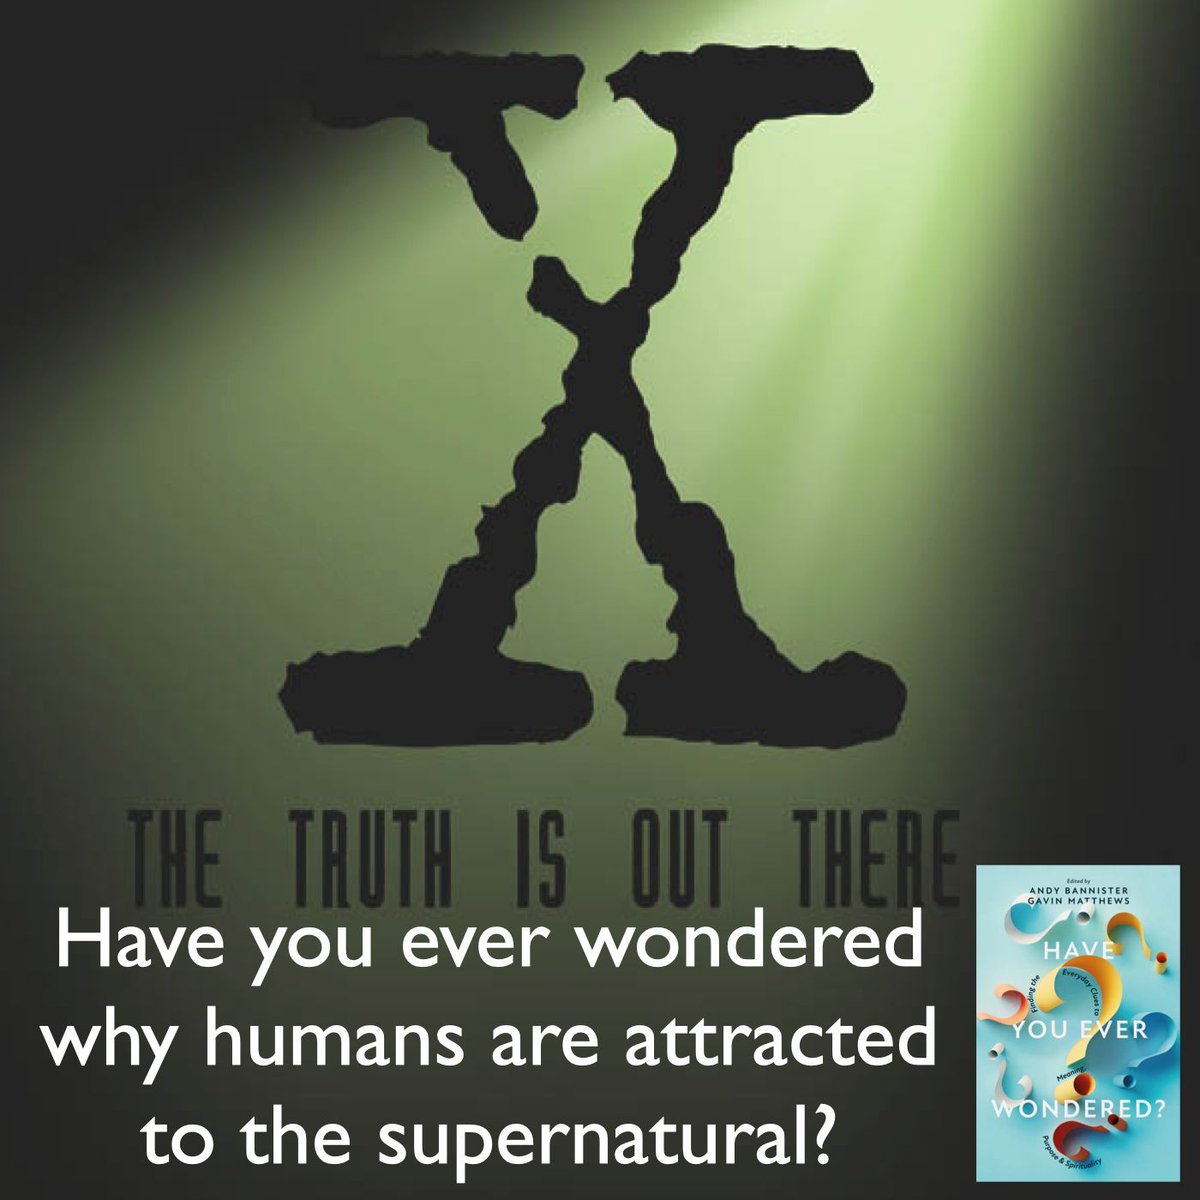 Have you ever wondered why humans are fascinated by the supernatural? It's all over our movies & TV shows ... Escapism? Or is something else going on? That's one of many questions explored in the new book, 'Have You Ever Wondered?'. Find it at buff.ly/3UJqXJA.